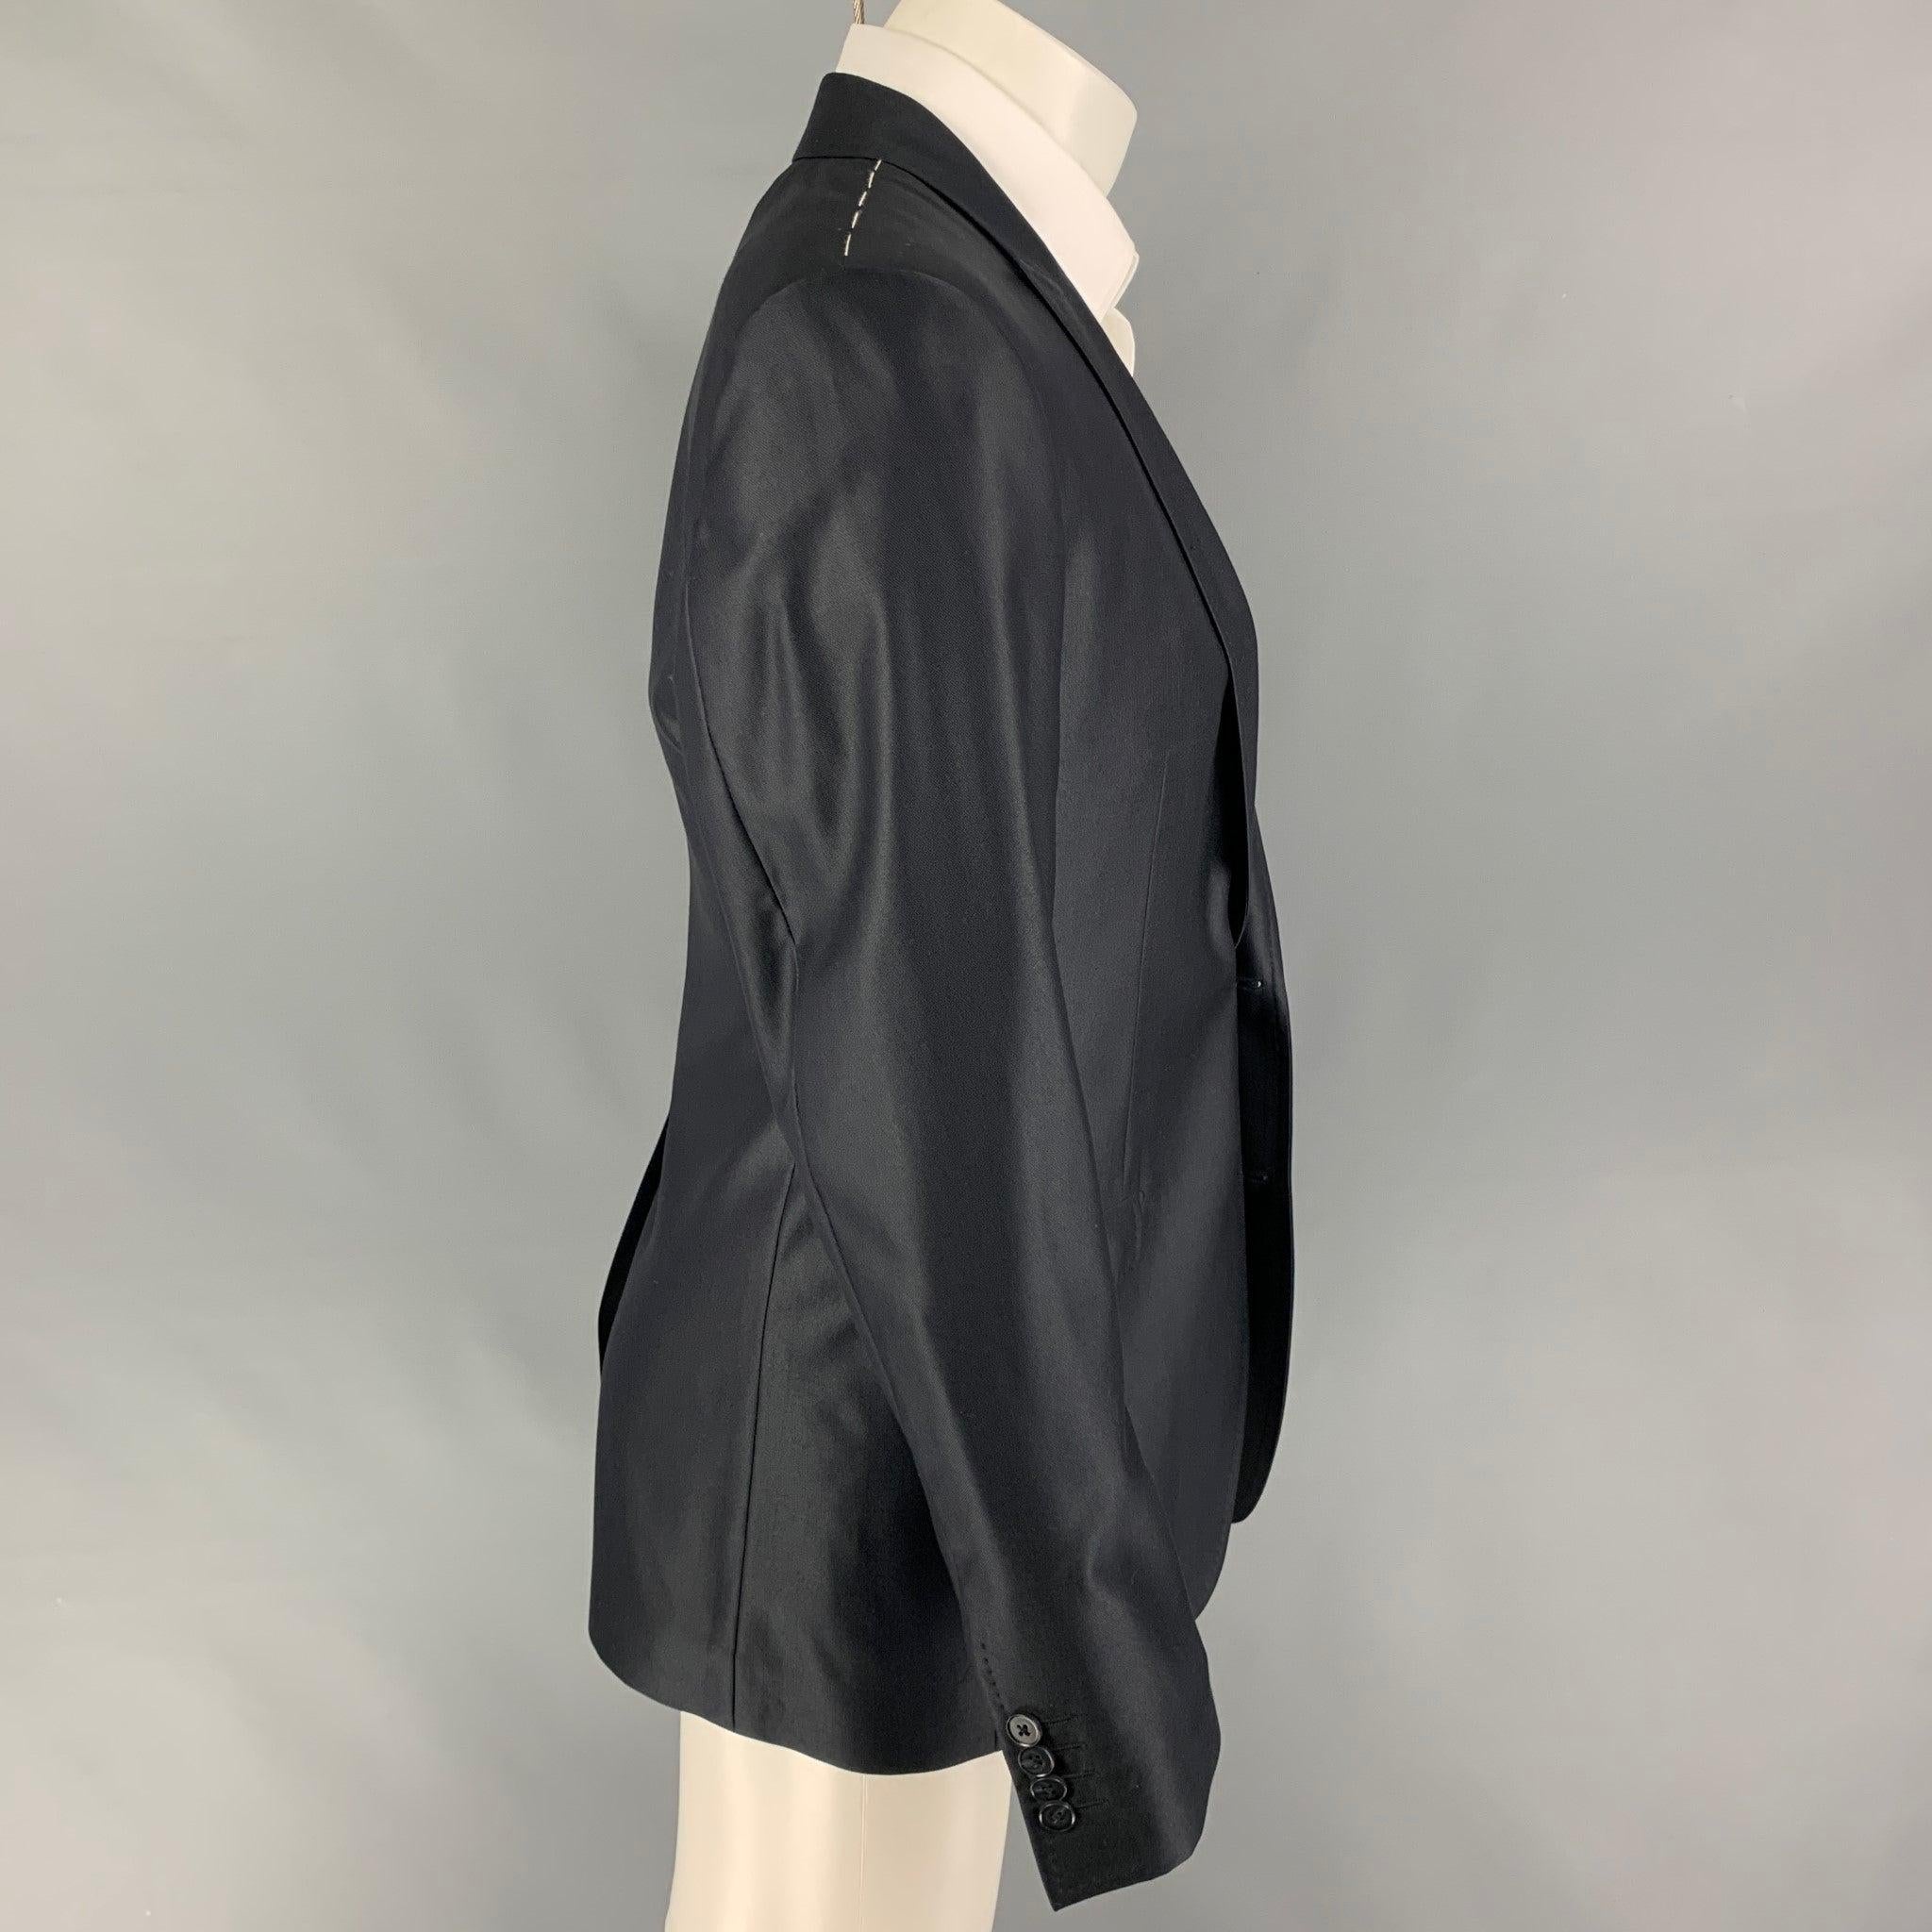 DOLCE & GABBANA 'Martini' sport coat comes in a black wool blend with a full liner featuring a peak lapel, flap pockets, single back vent, and a double button closure. Made in Italy. New with tags. 

Marked:   48 

Measurements: 
 
Shoulder: 17